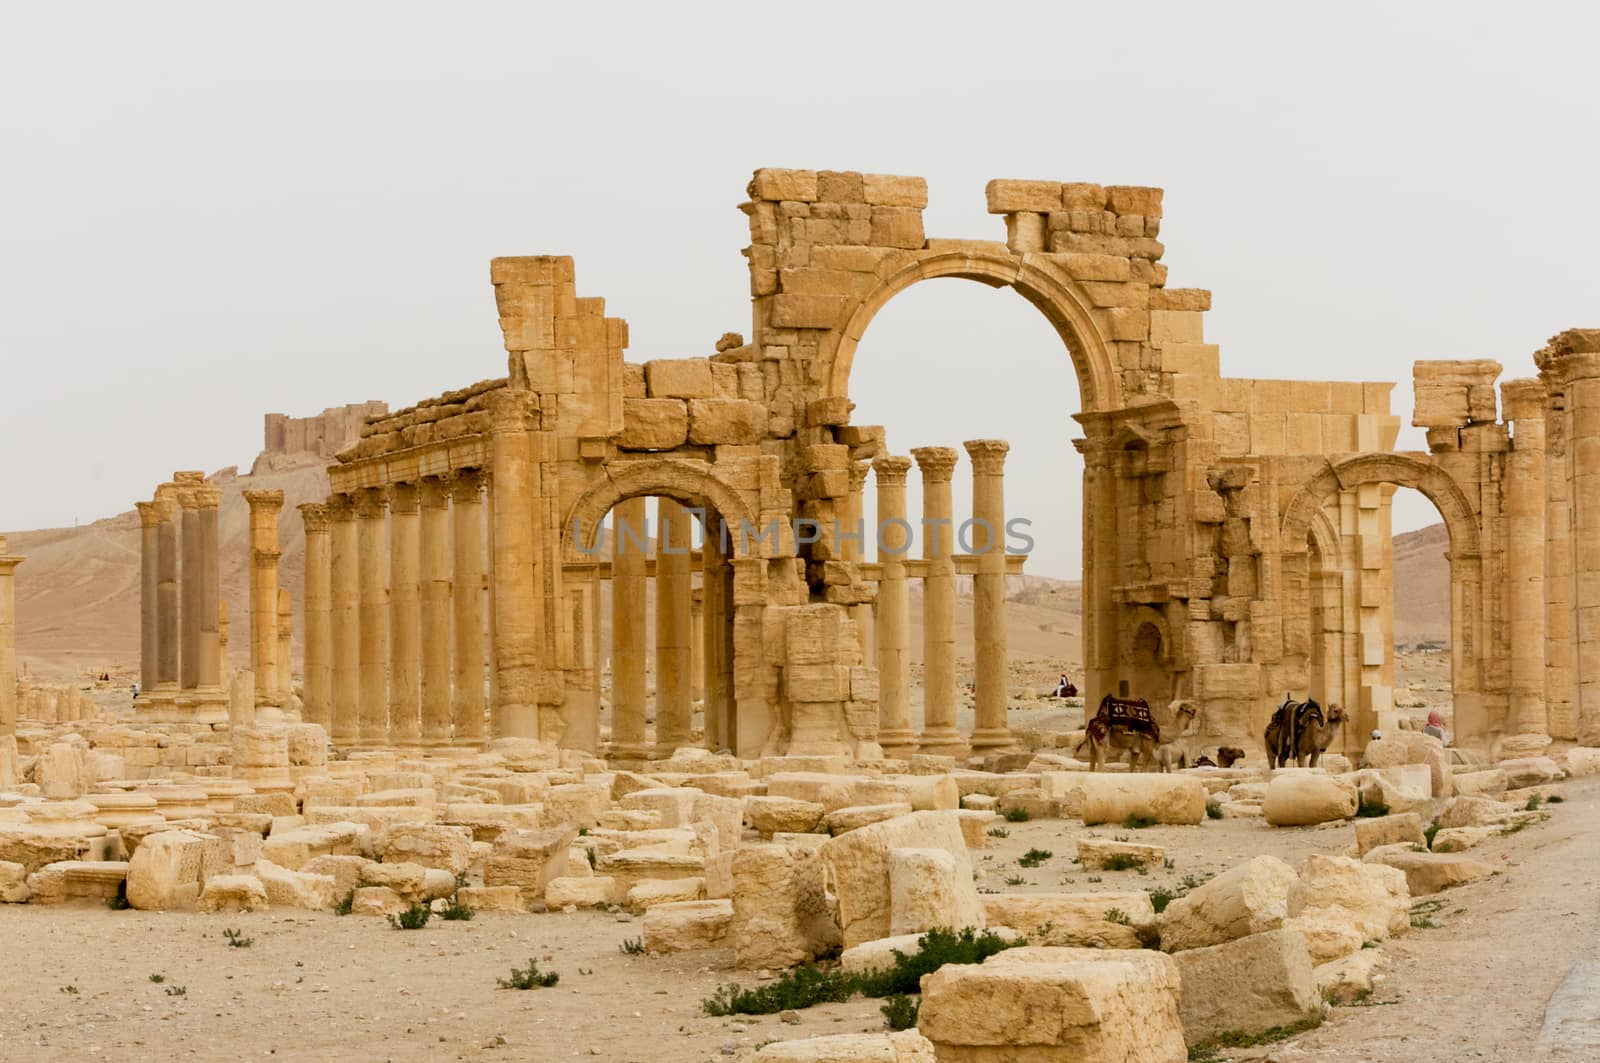 Palmyre Syria 2009 This ancient site has many Roman ruins, these standing columns and arch of triumph . High quality photo